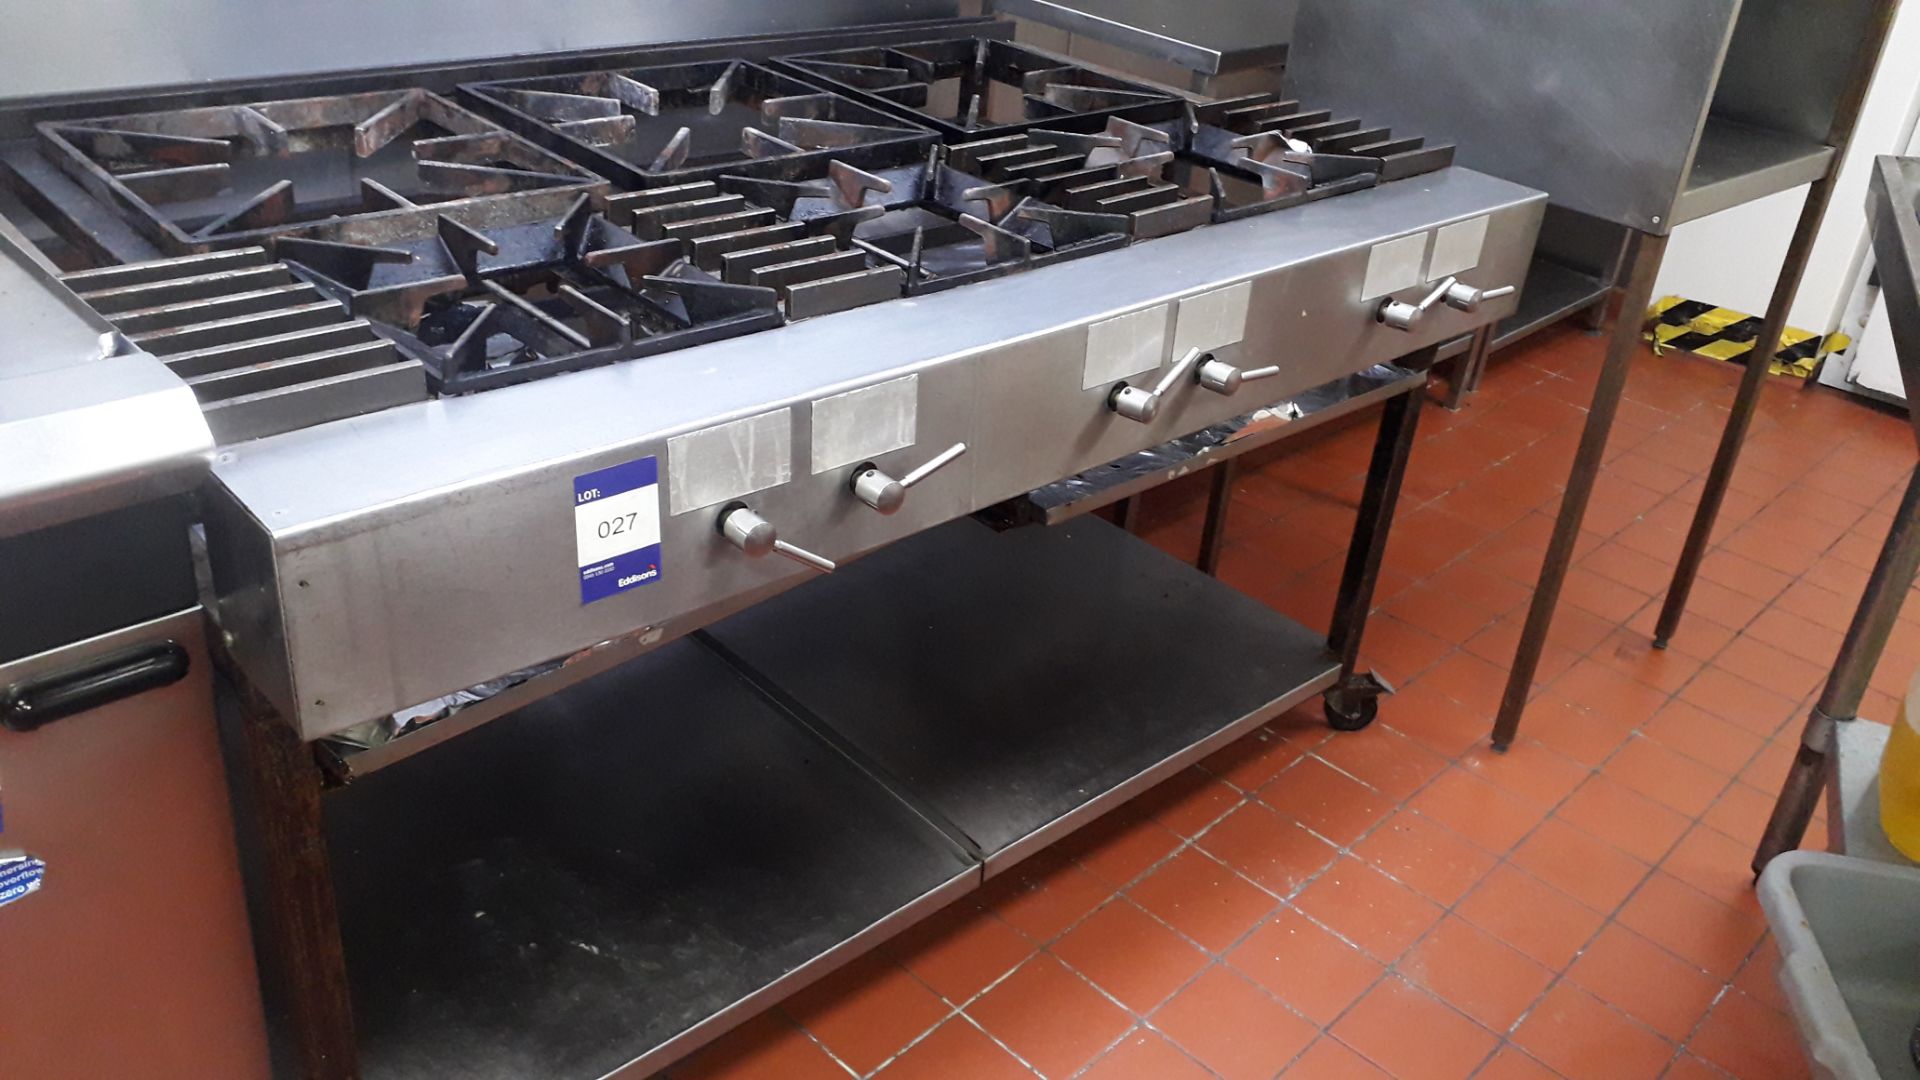 Stainless steel commercial 6-burner gas Range on stand with shelf under (disconnection required by - Image 2 of 3